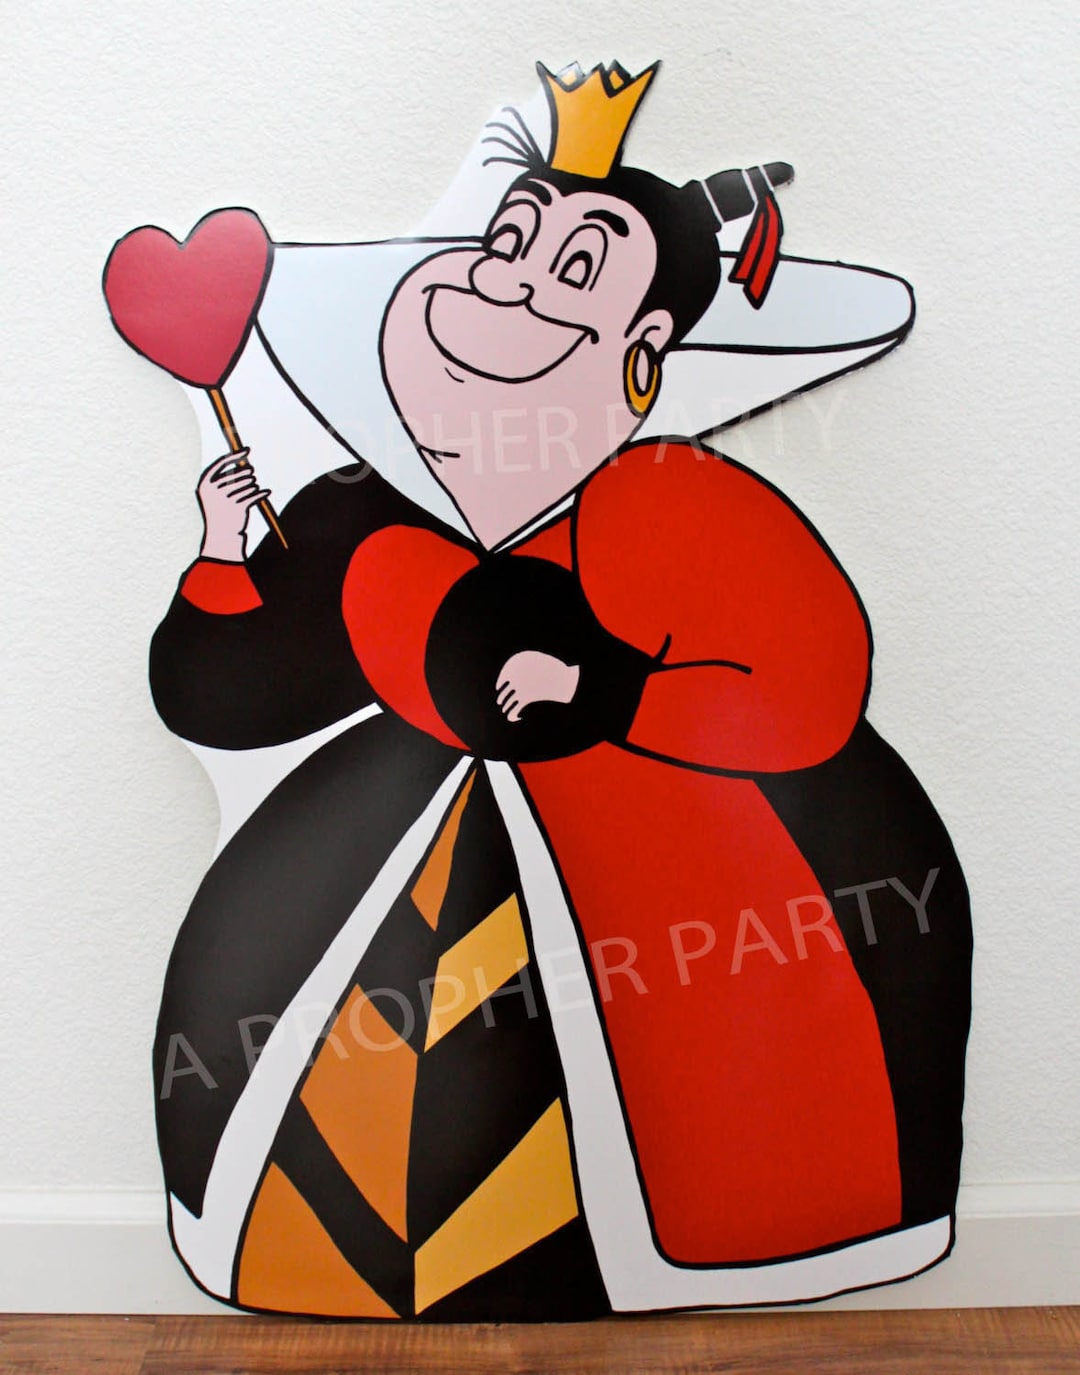 Disney's Alice in Wonderland Cake Topper Set Featuring the Queen of Hearts